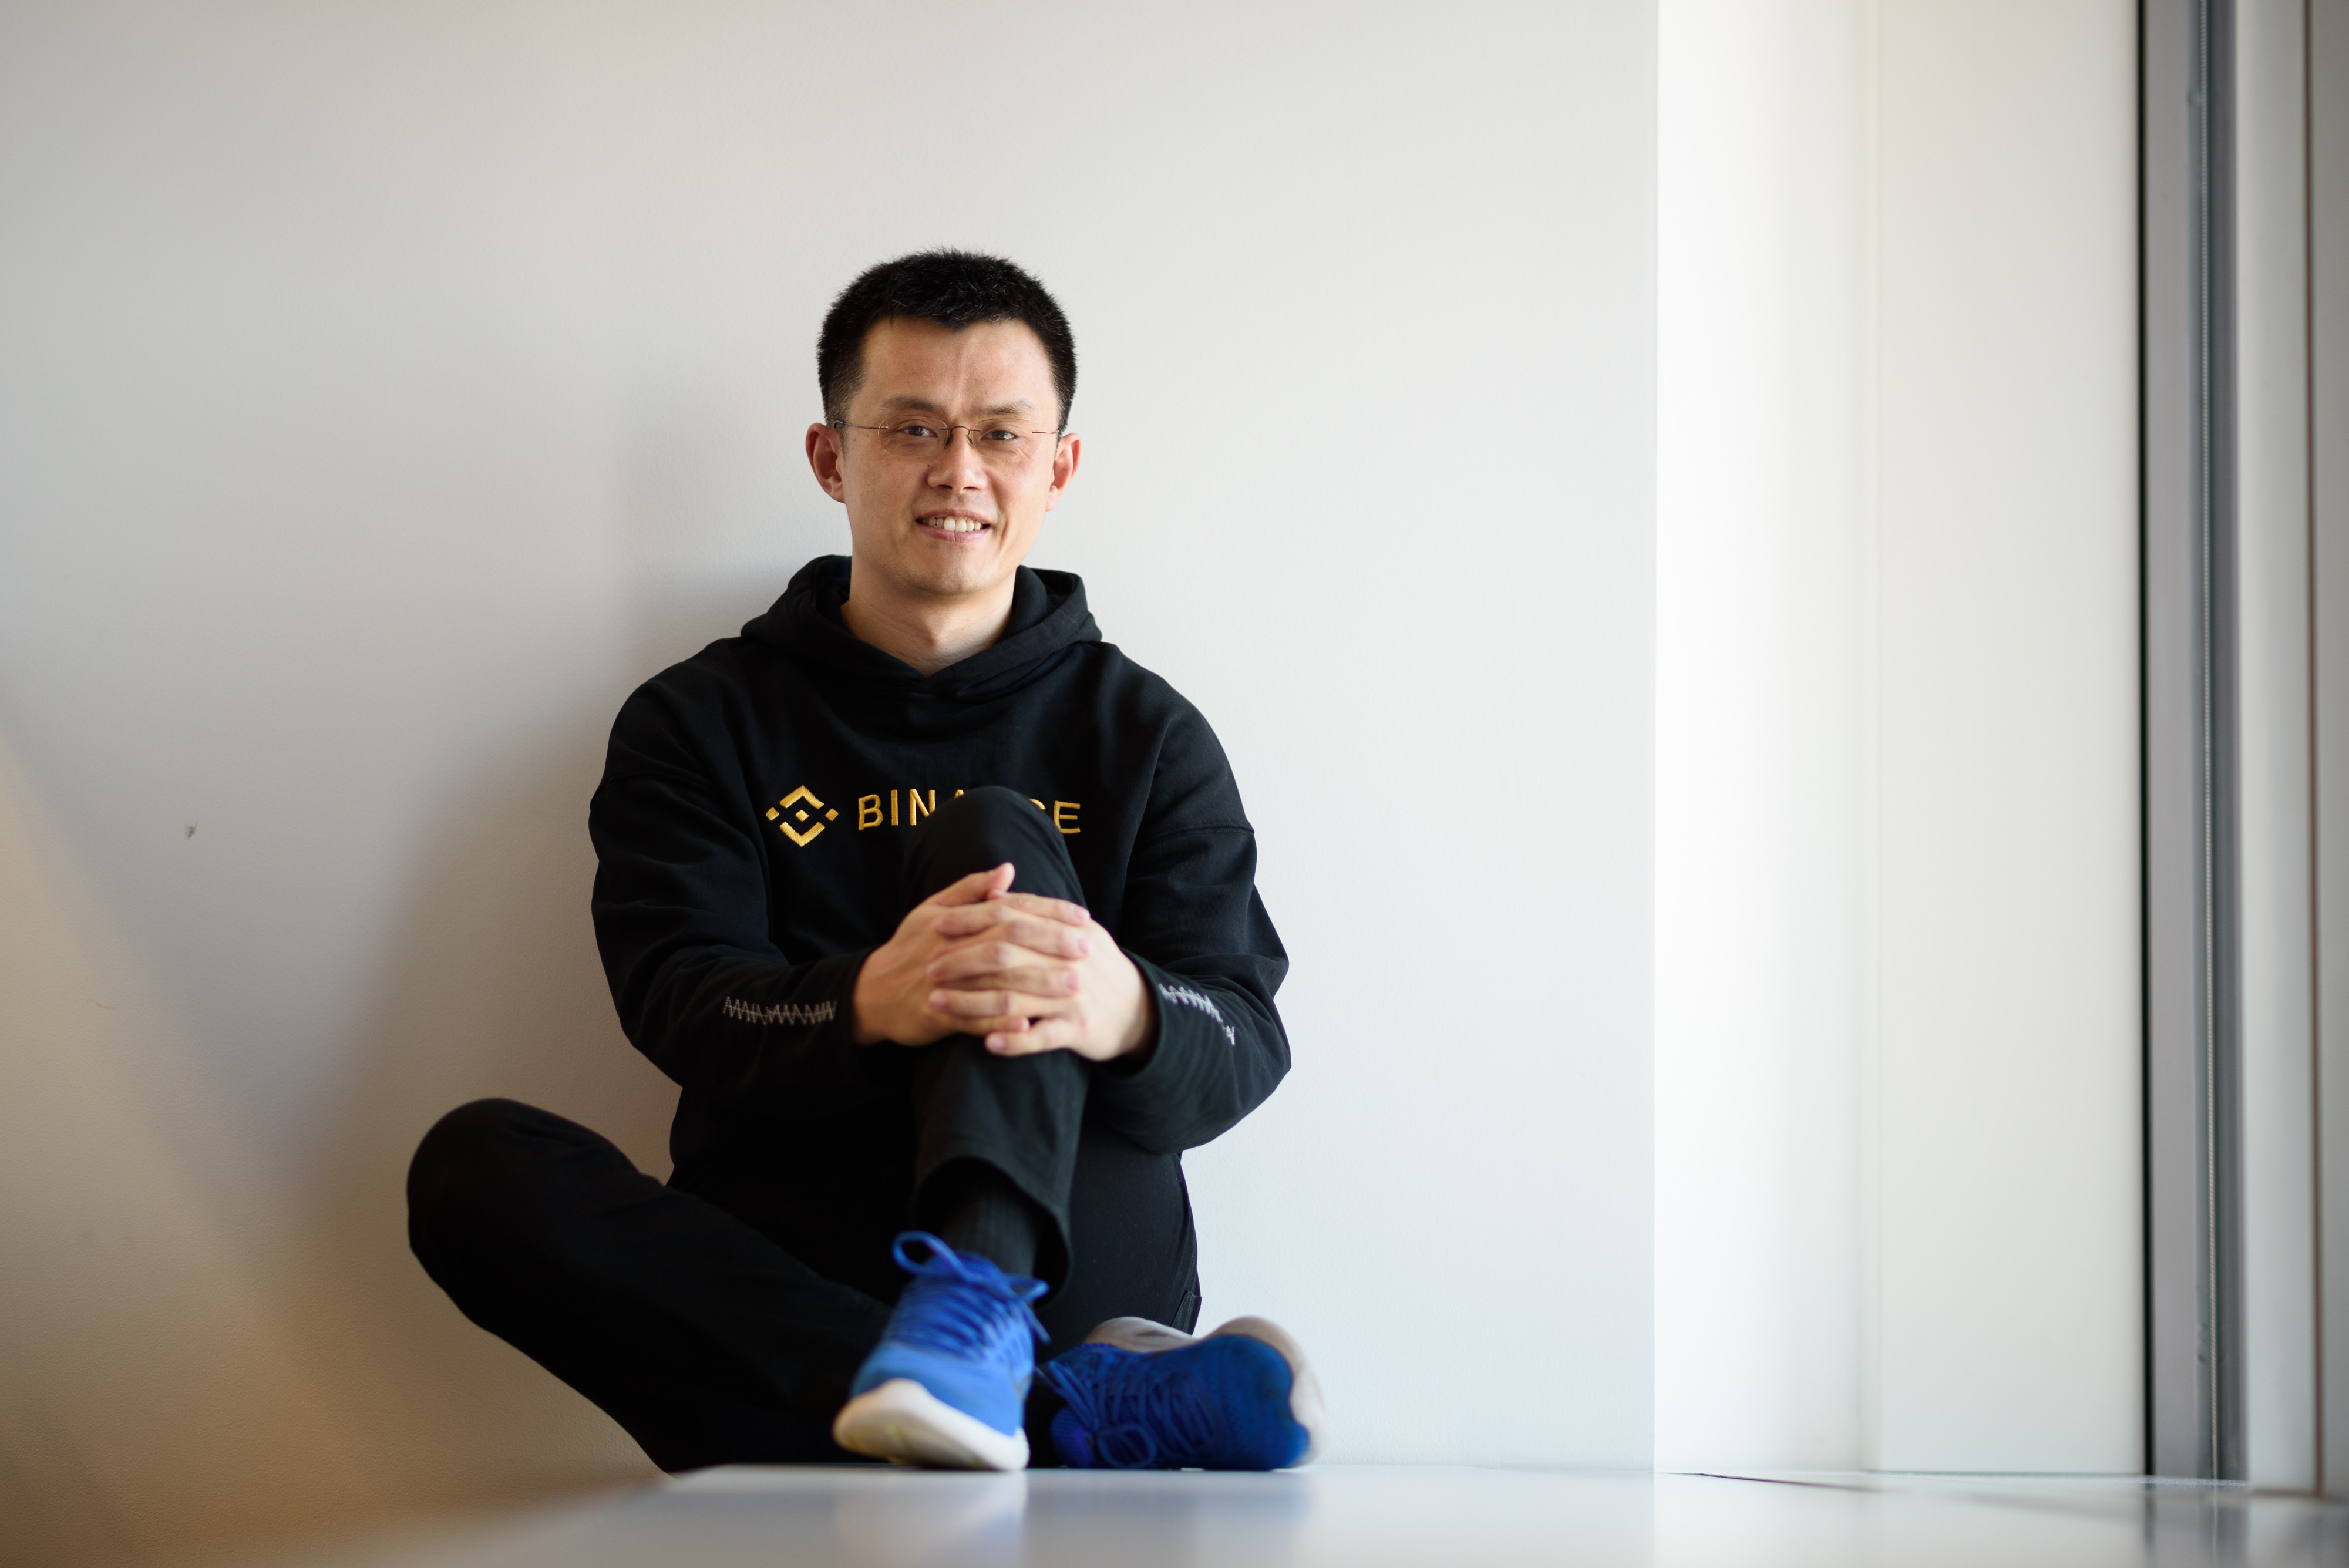 Zhao Changpeng, chief executive officer of cryptocurrency exchange Binance, has come from nowhere to be among the world’s richest men, but professes that he’s not interested in rankings of wealth. Photo: Bloomberg